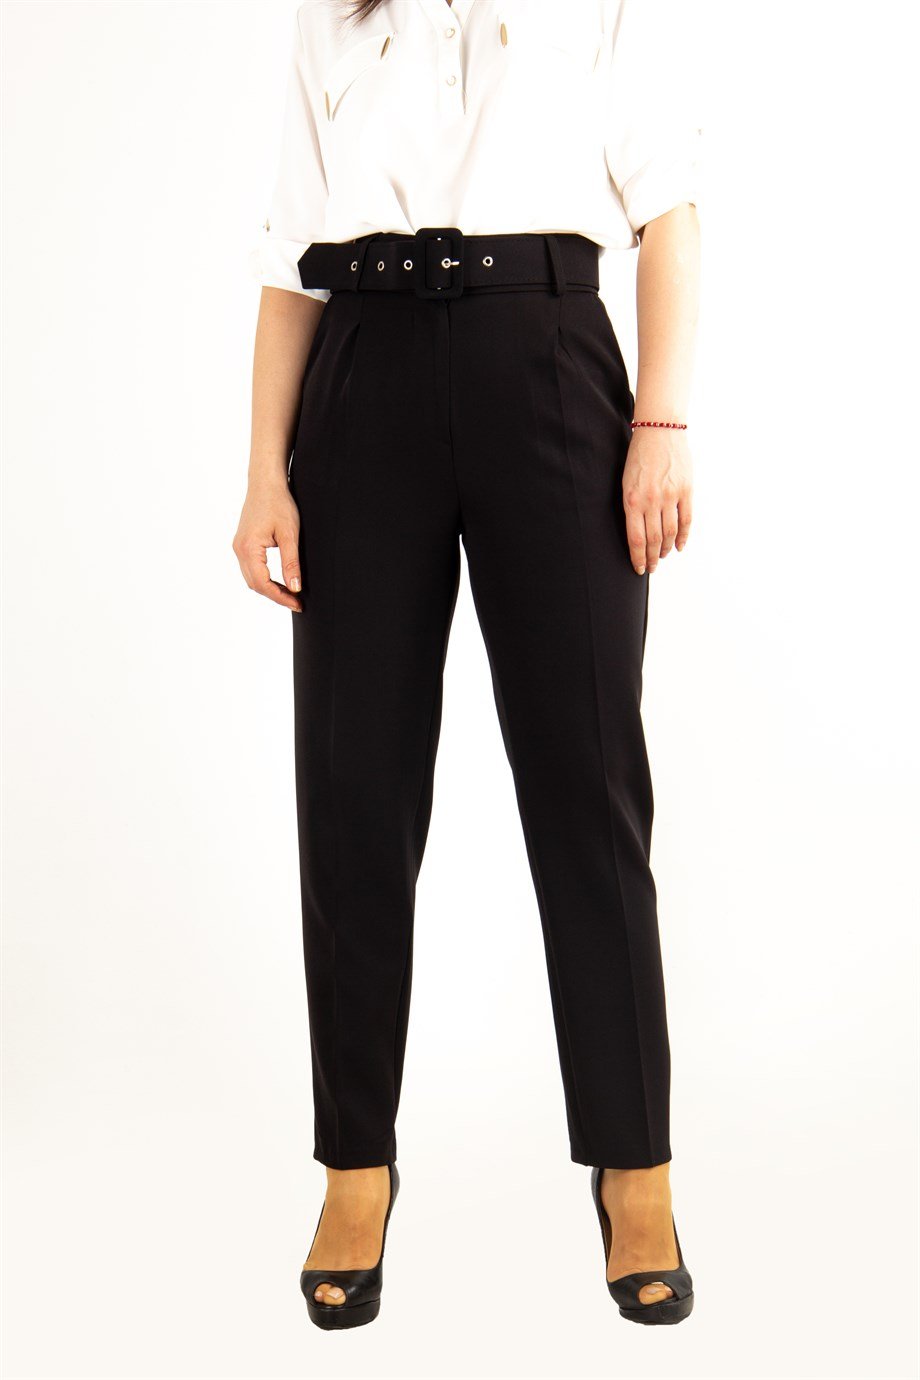 7 Best Formal Trousers You Can Buy From Myntra Under Rs 1500  HerZindagi